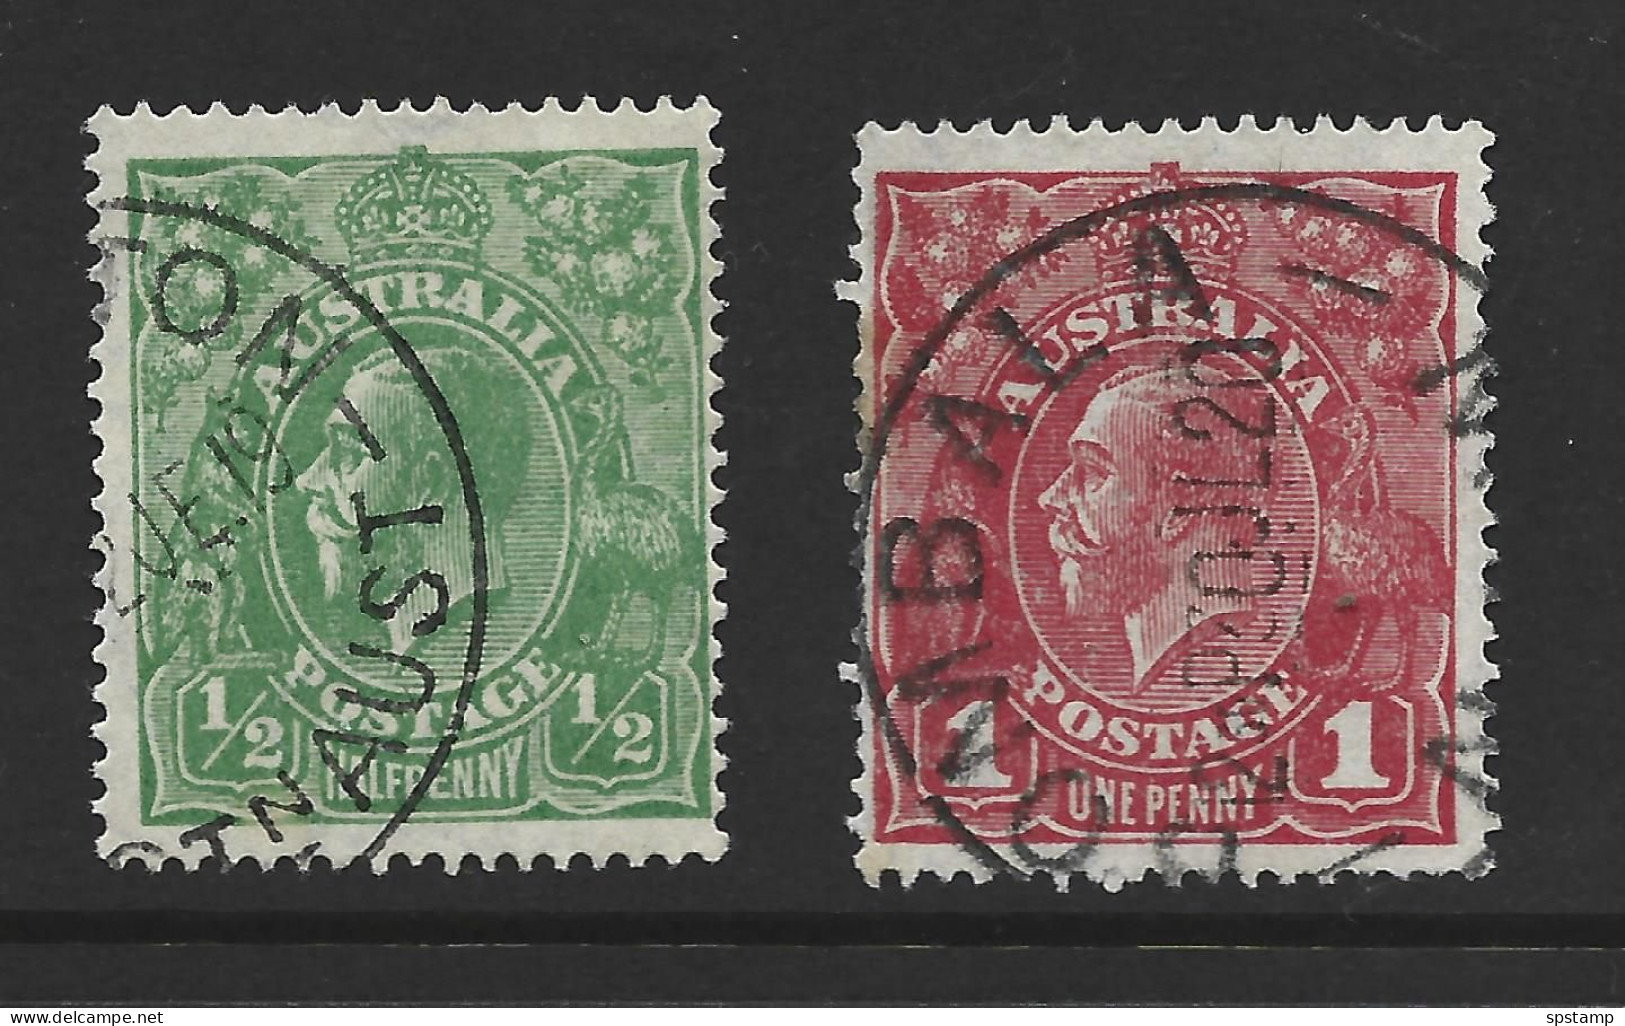 Australia 1918 - 1920 1/2d Green & 1d Red KGV Definitive Singles LM Watermark Perf 14 FU - Used Stamps